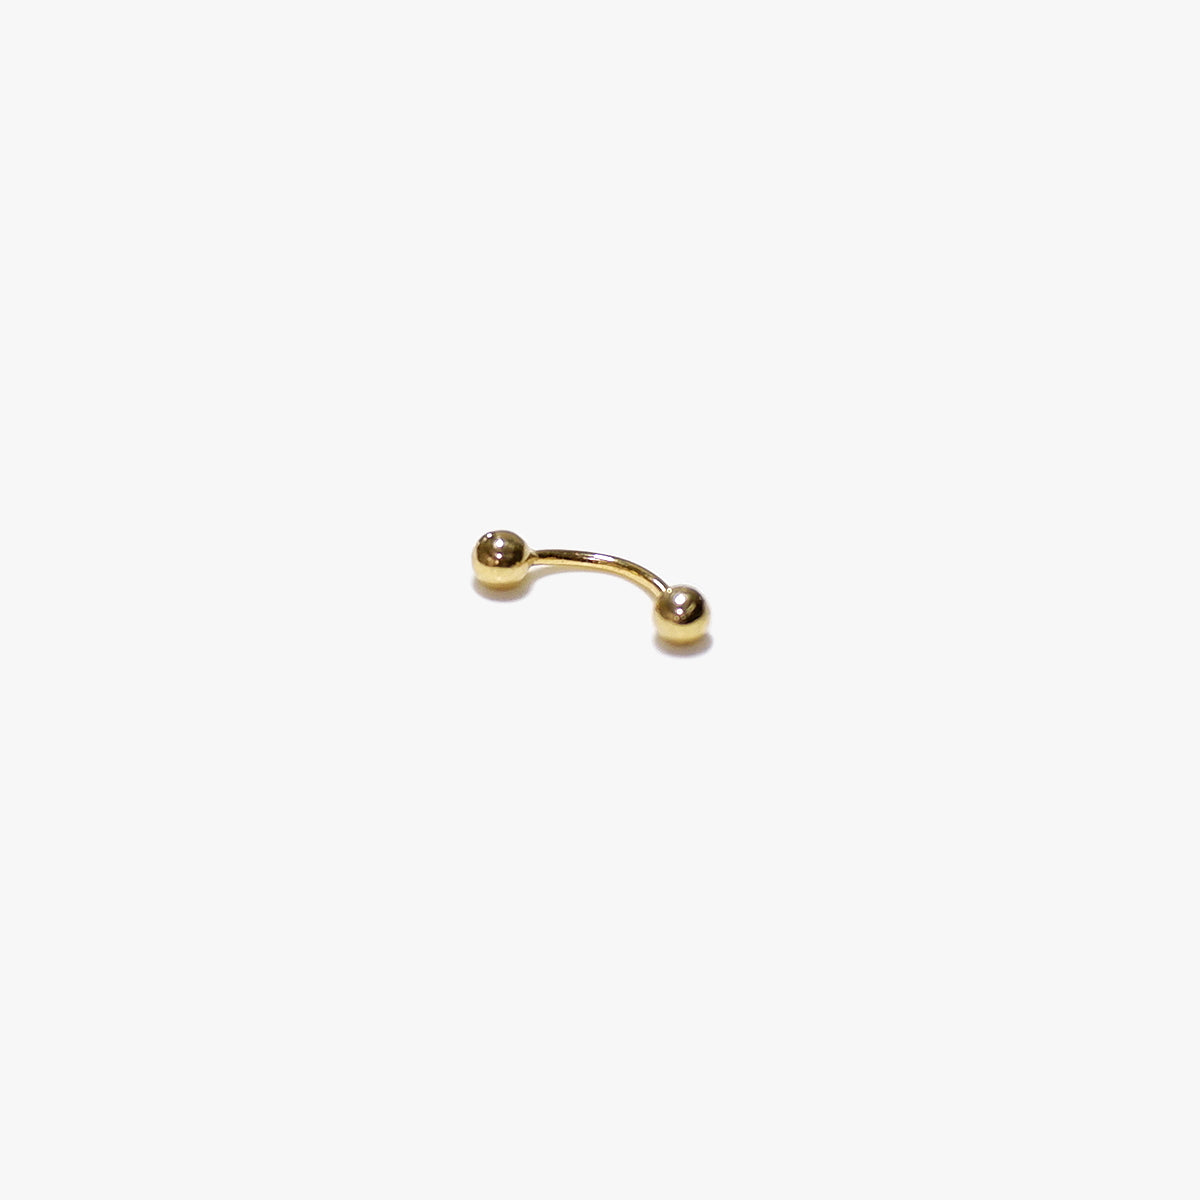 The Birthstone Bent Barbell in Solid Gold